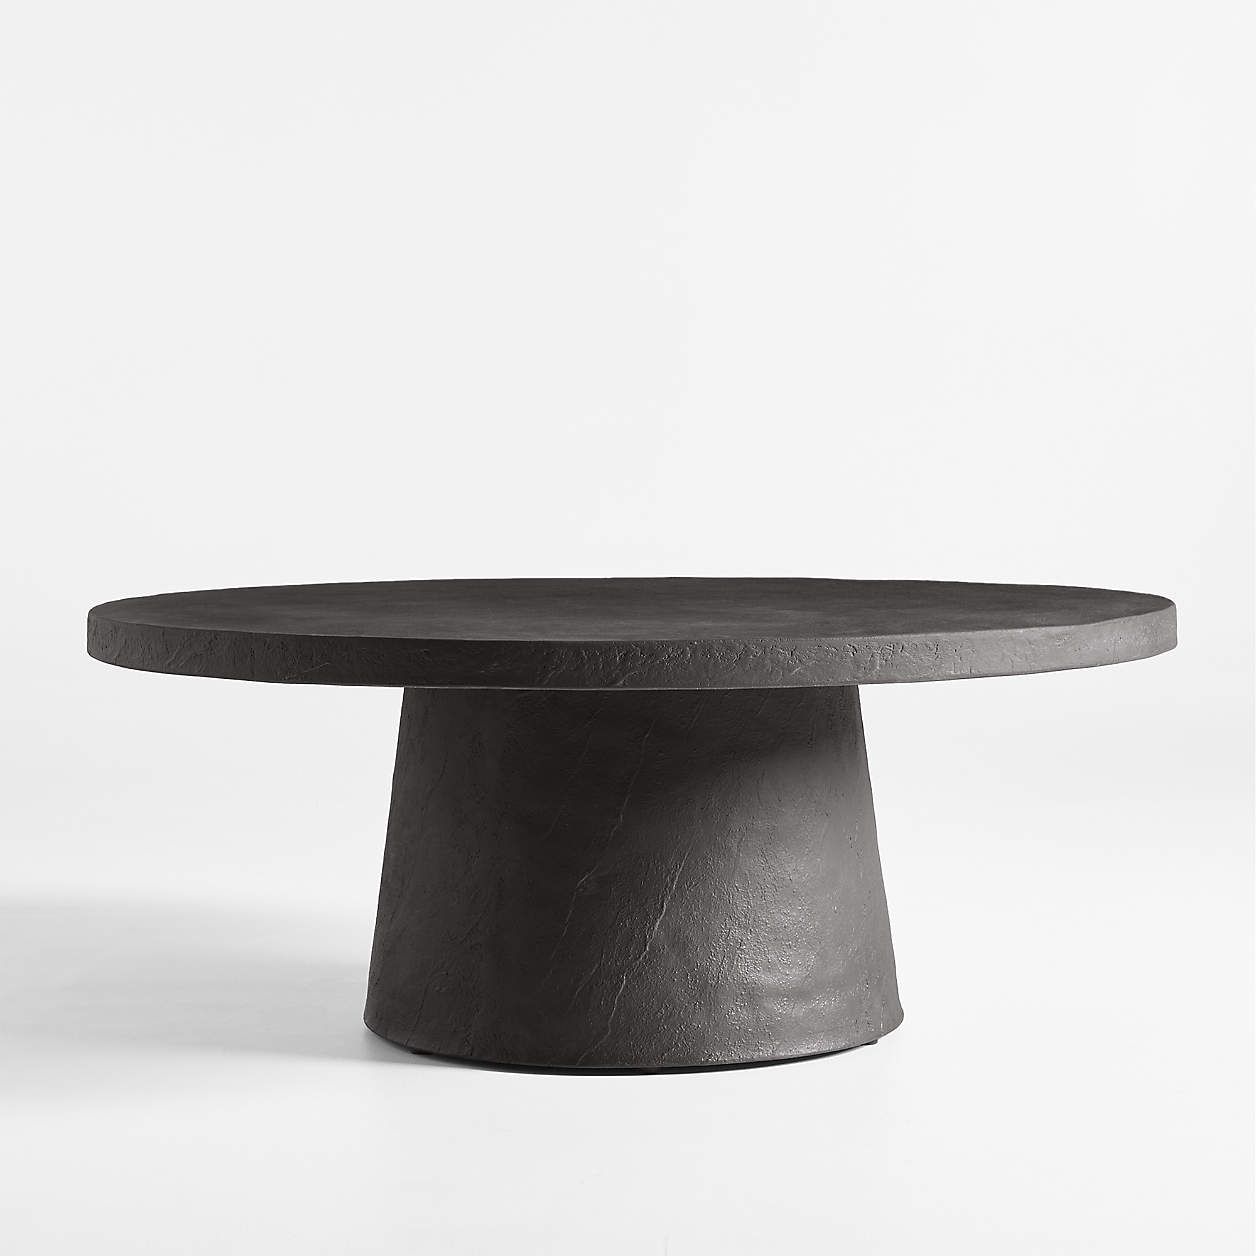 Willy White Pedestal Coffee Table by Leanne Ford + Reviews | Crate and Barrel | Crate & Barrel